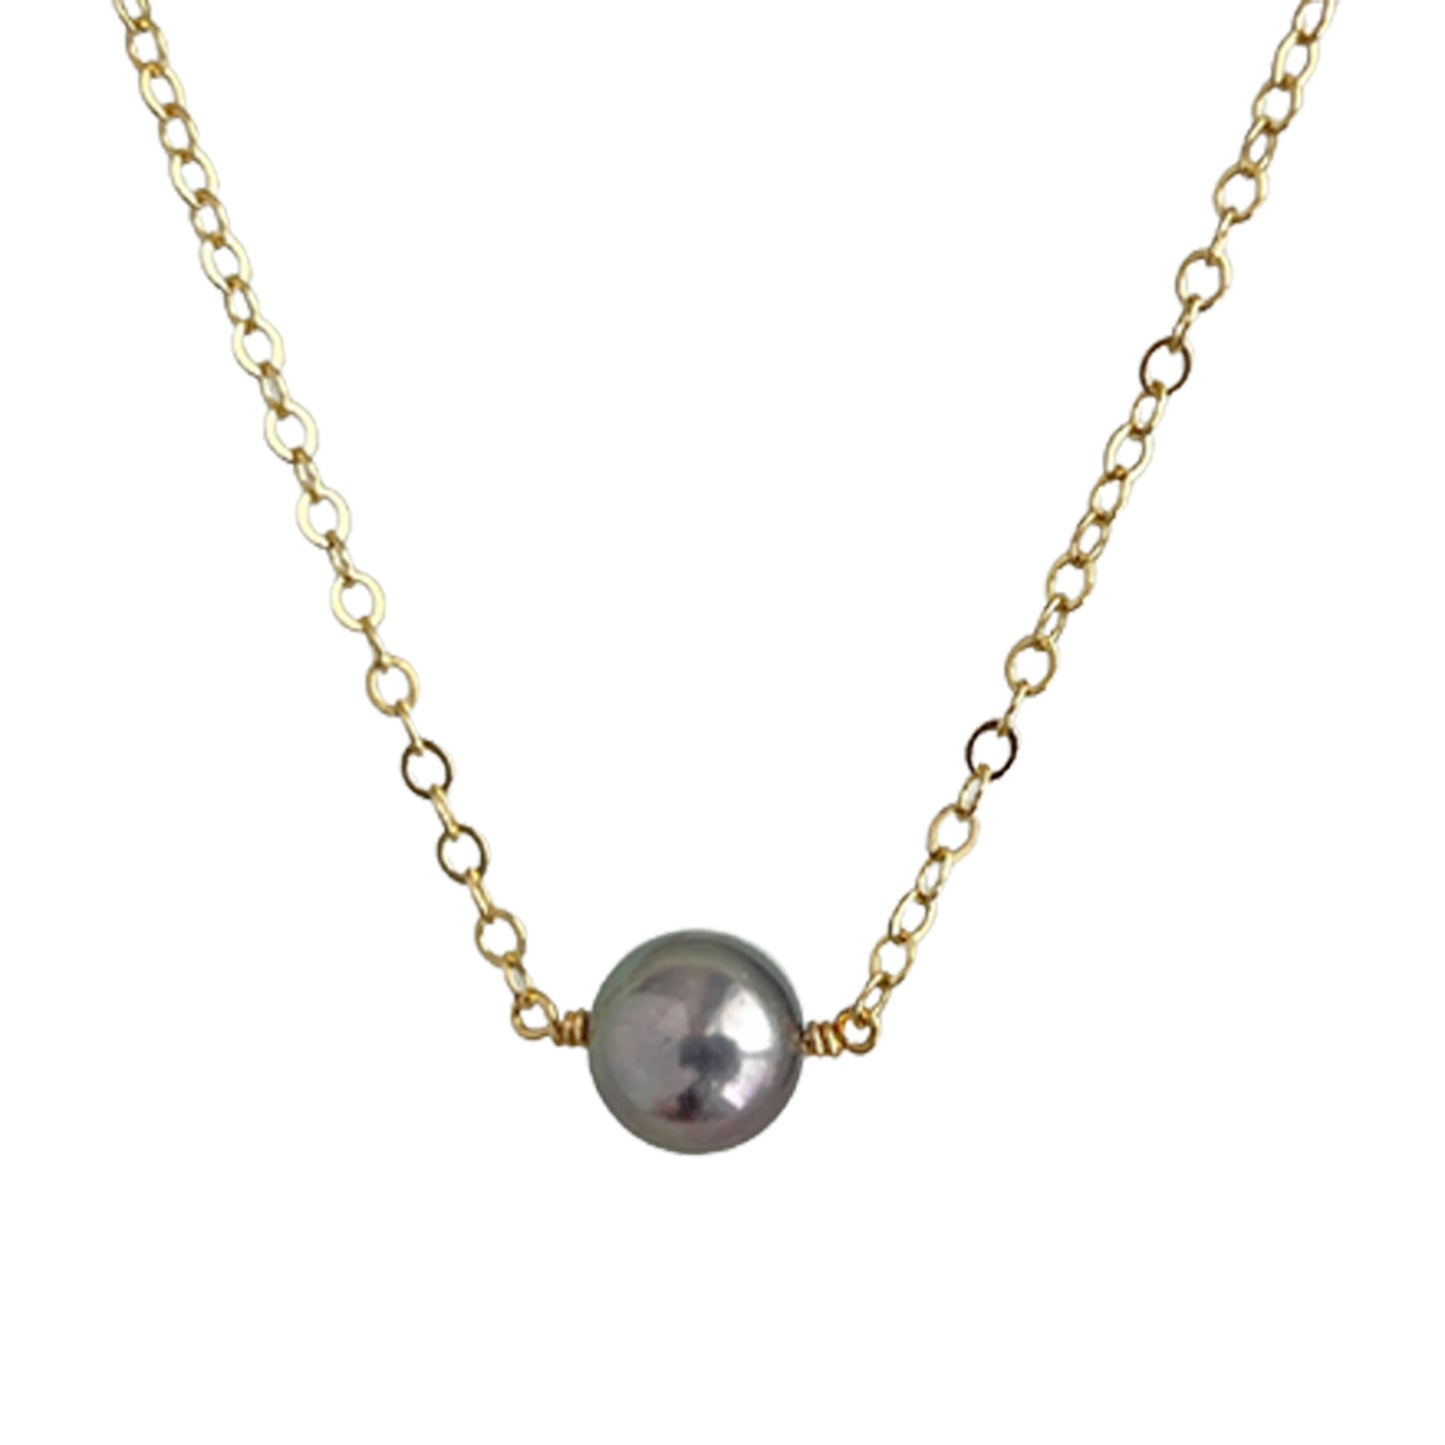 Black Floating Pearl Necklace - Single Pearl Necklace